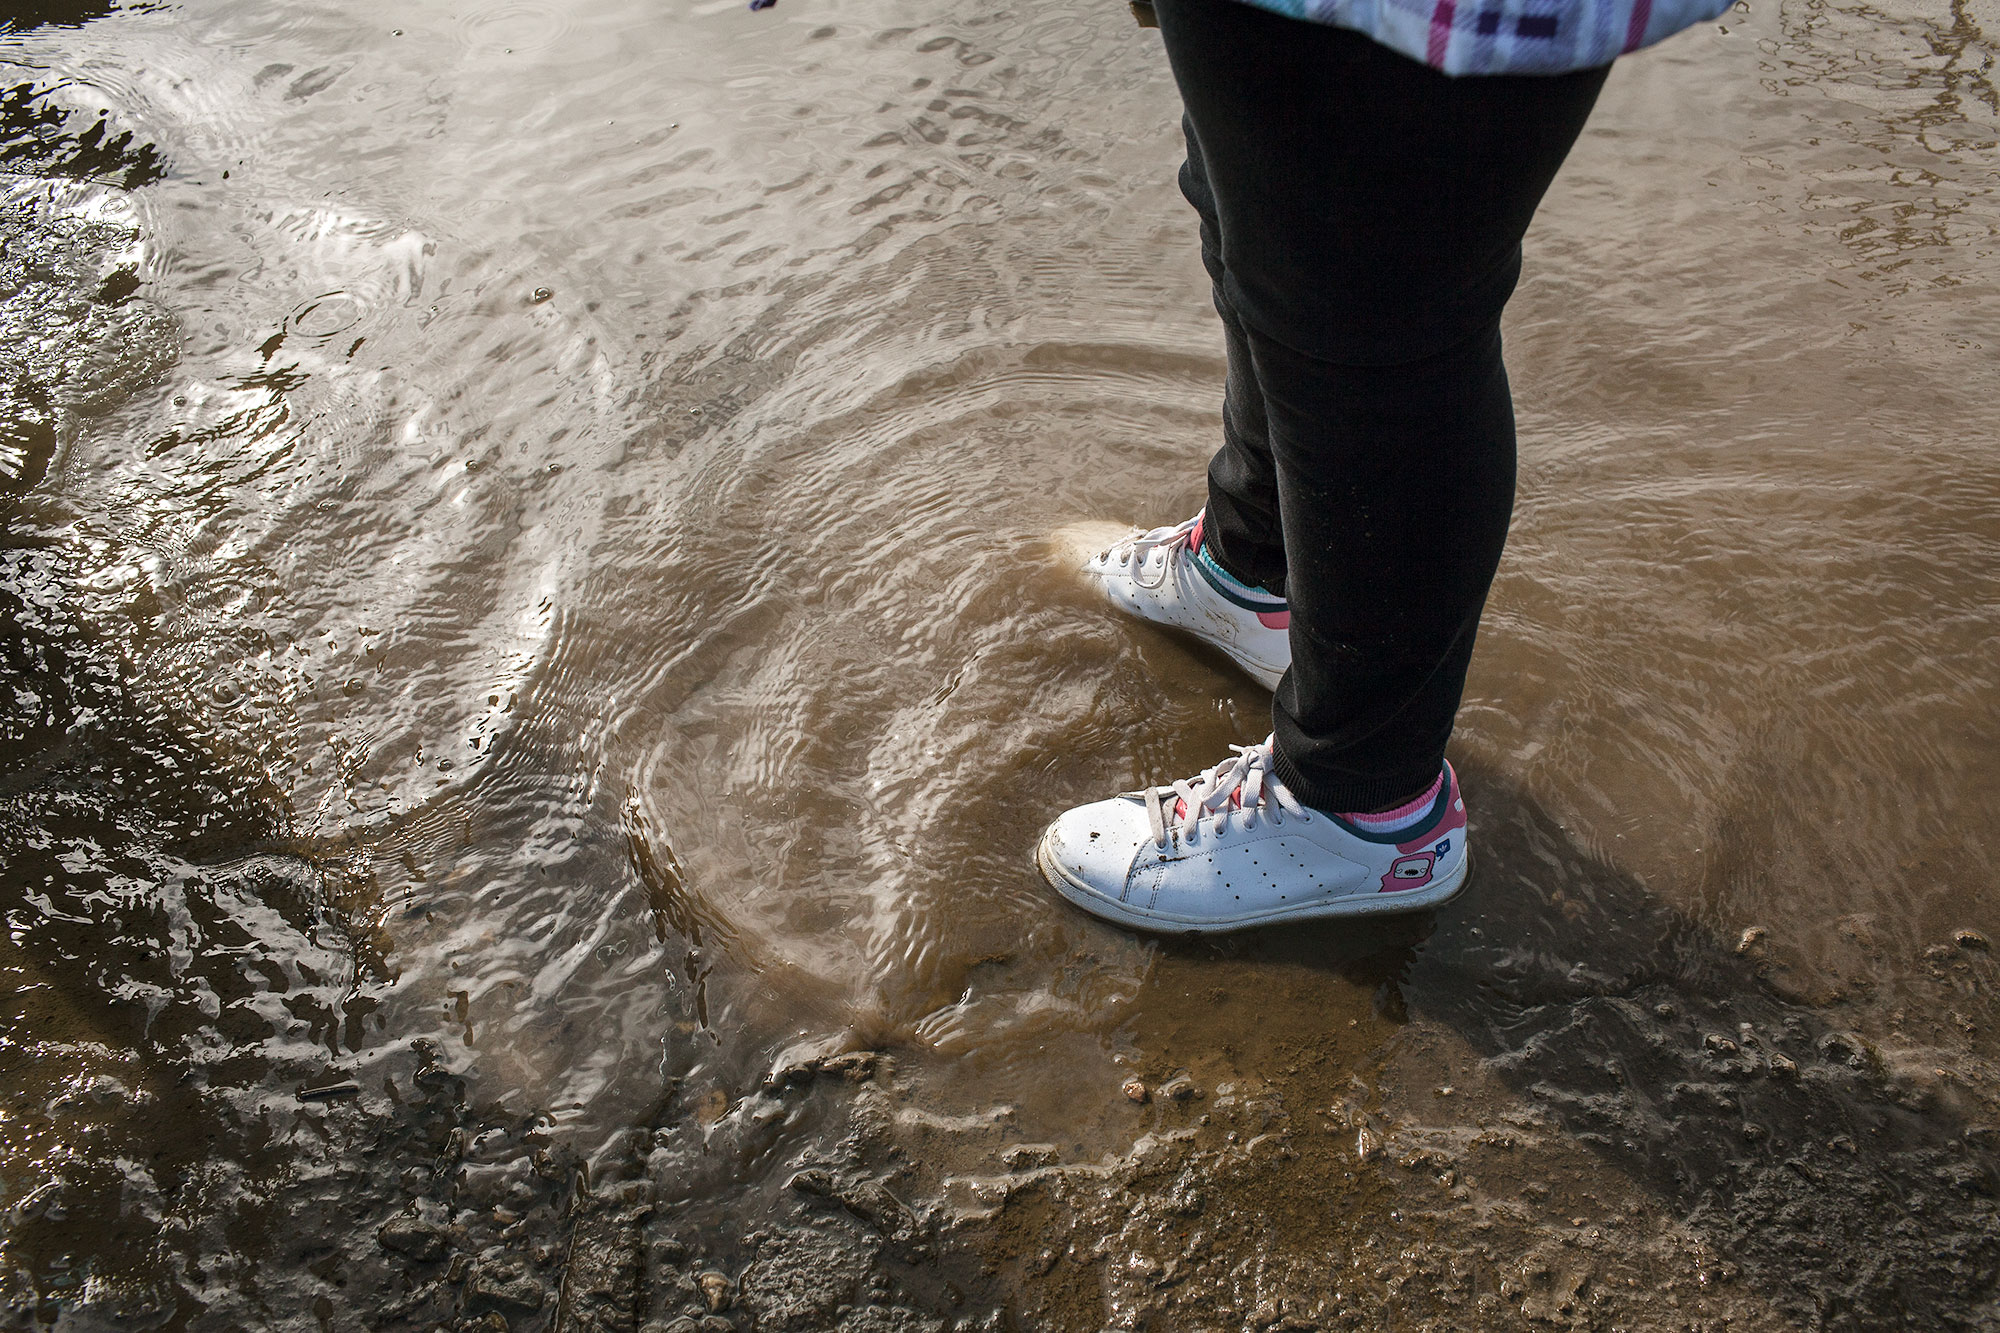  A young girl wades in the shallow water on the shore of the Anacostia River. She visited Seafarers to participate in the 2013 Earth Day Clean Up. 